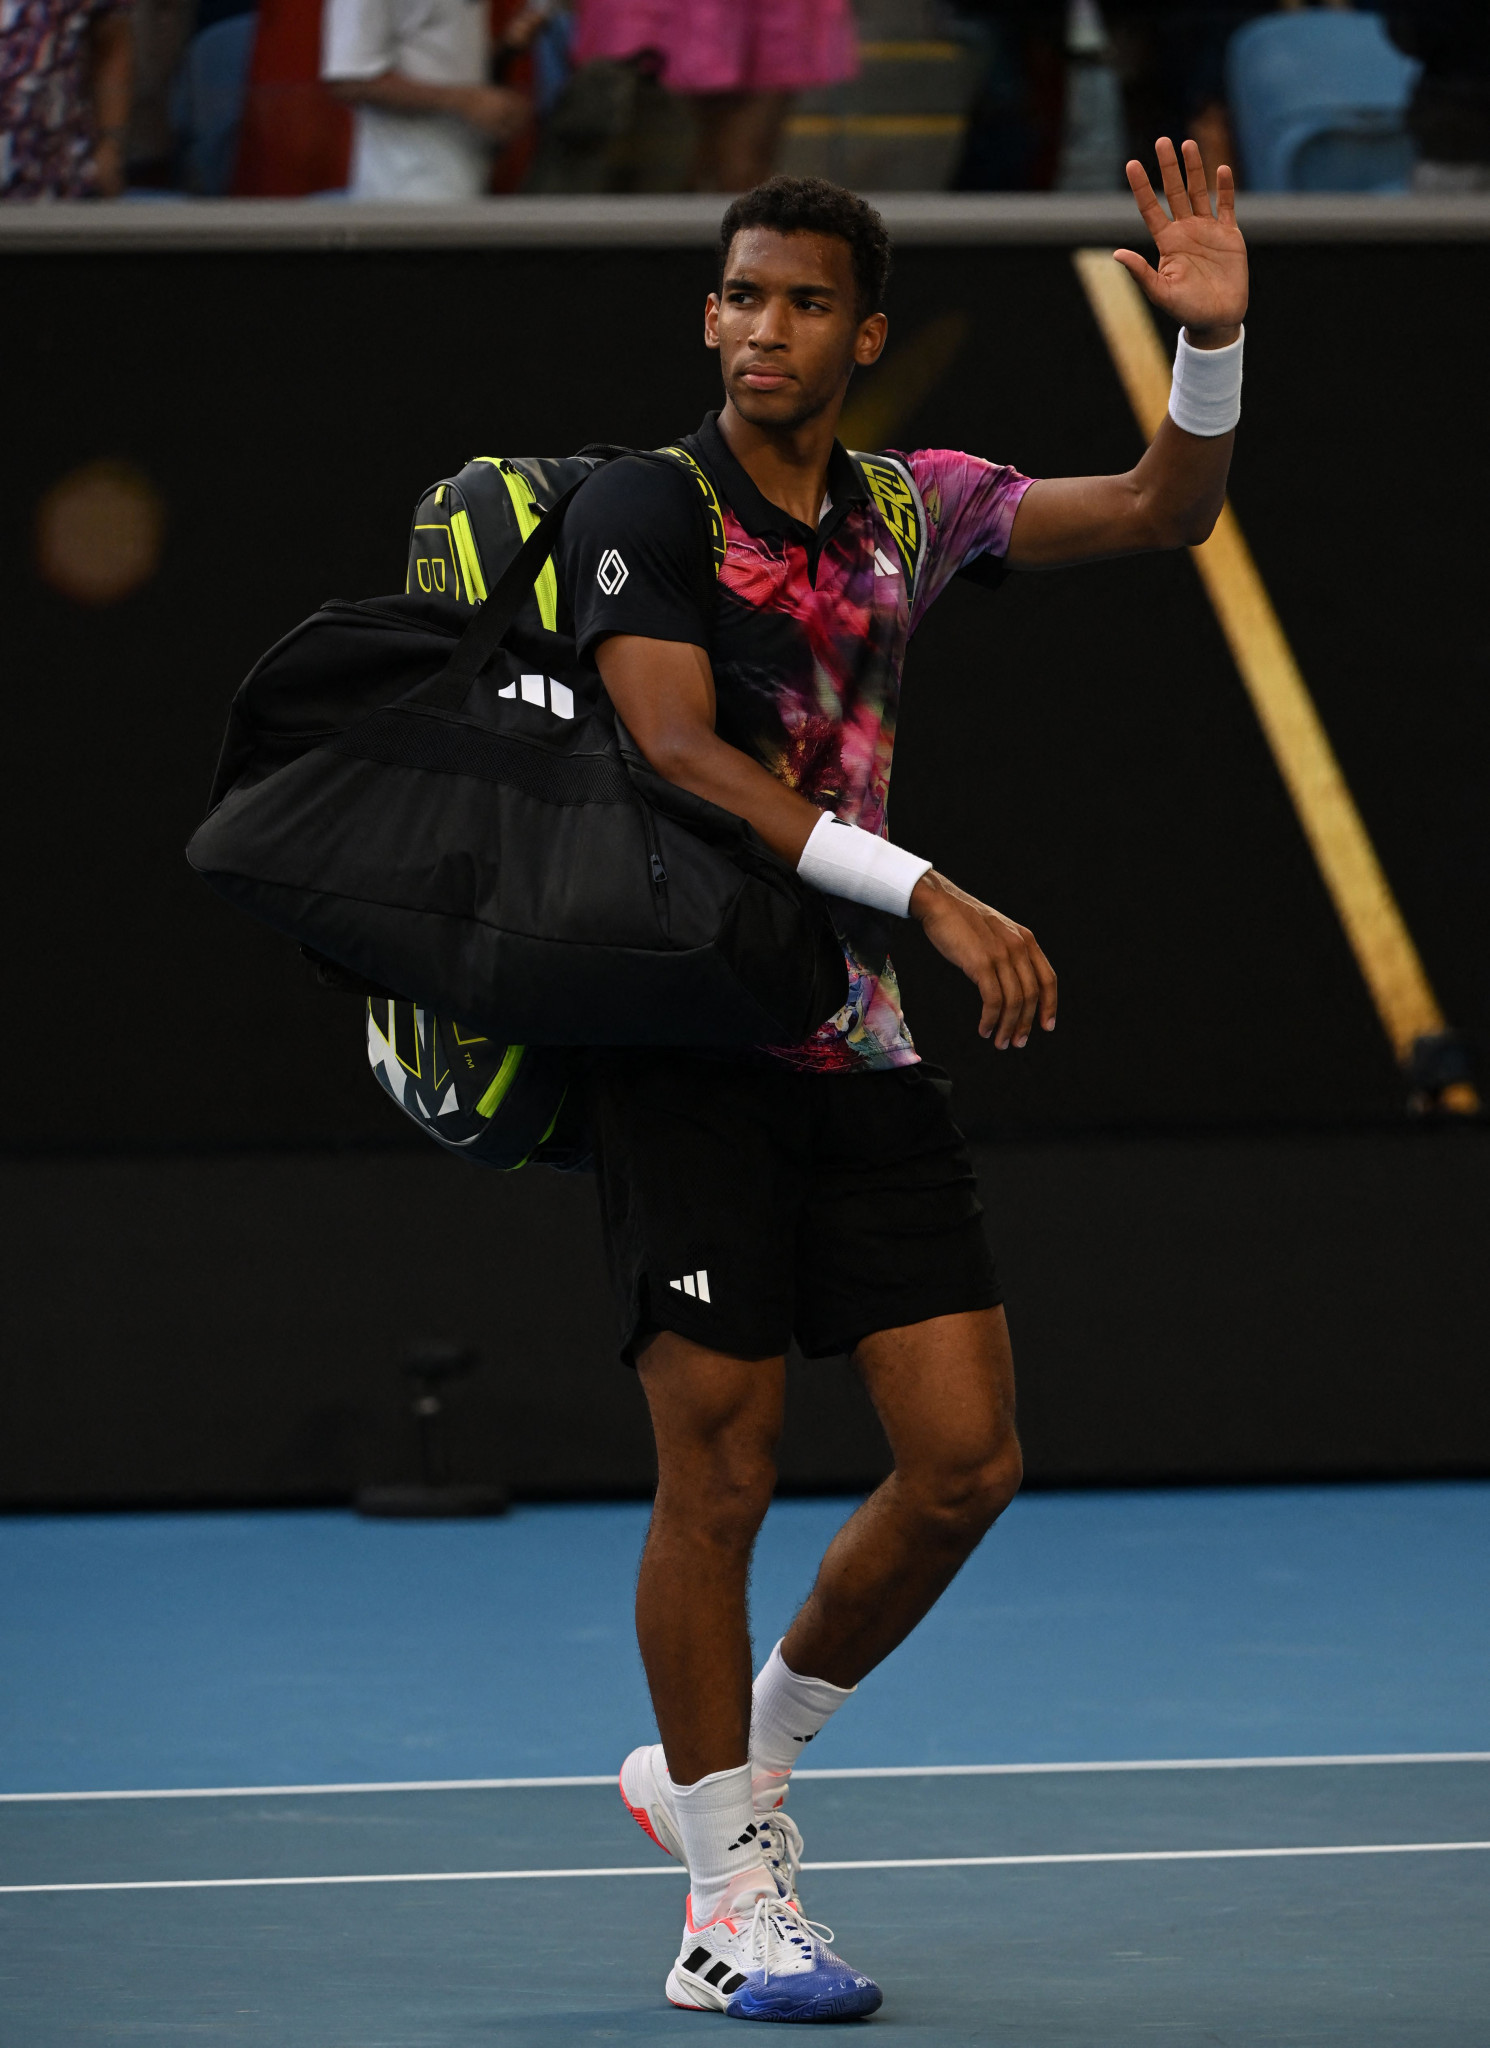 Félix Auger-Aliassime of Canada, seeded sixth, led against Czech youngster Jiří Lehečka but fell to a 4-6, 6-3, 7-6, 7-6 defeat ©Getty Images